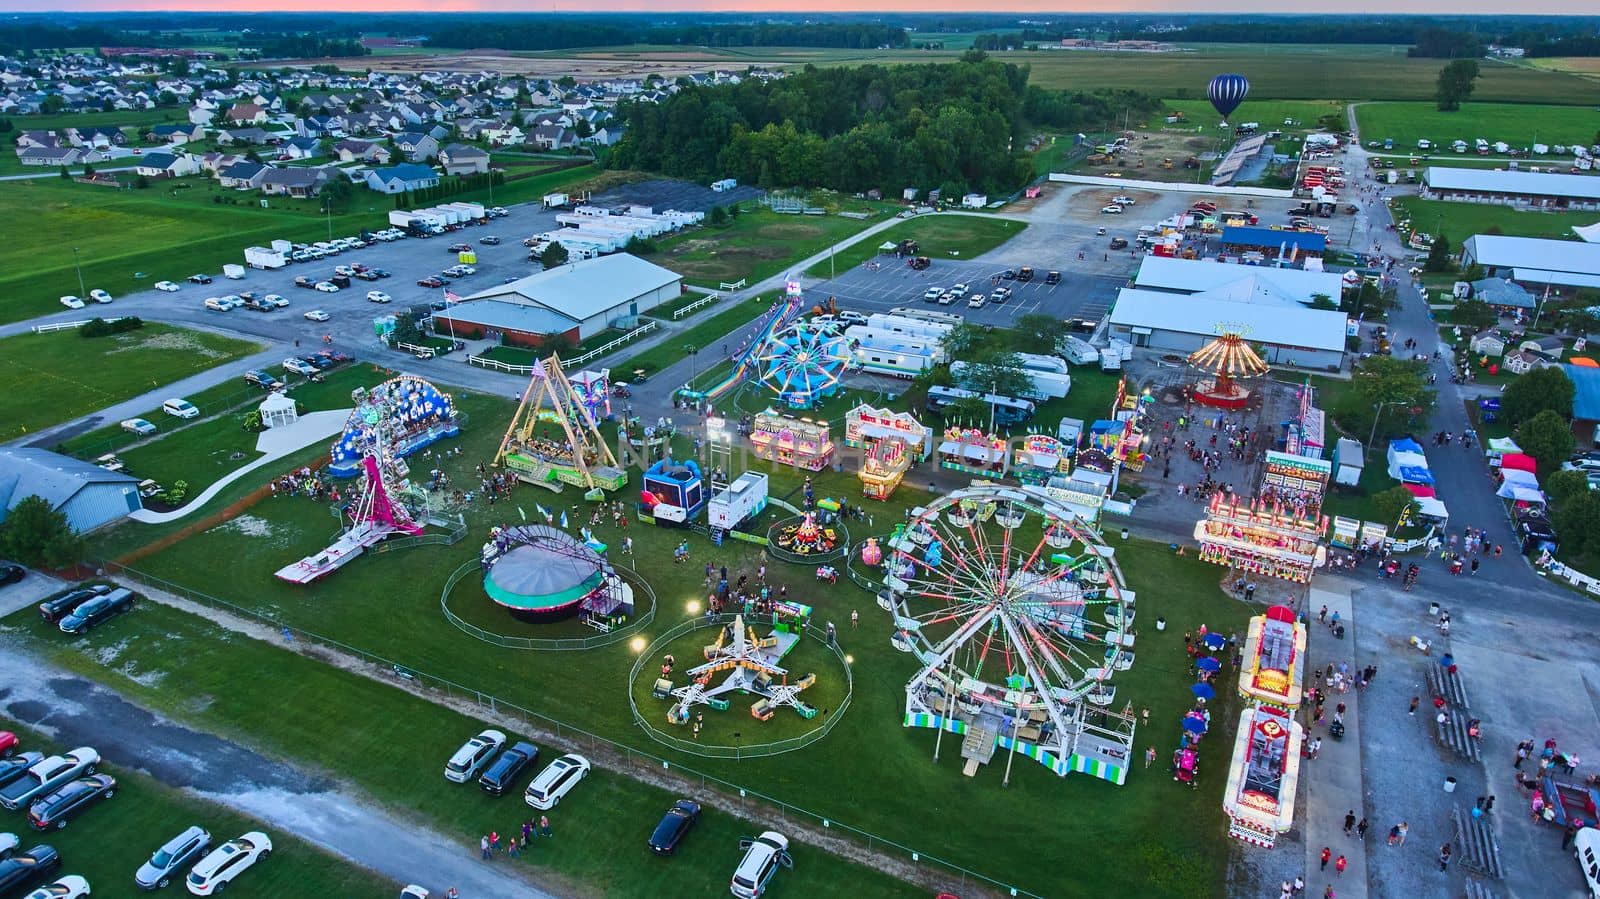 Dusk aerial over Allen County Fair carnival in midwest Indiana by njproductions